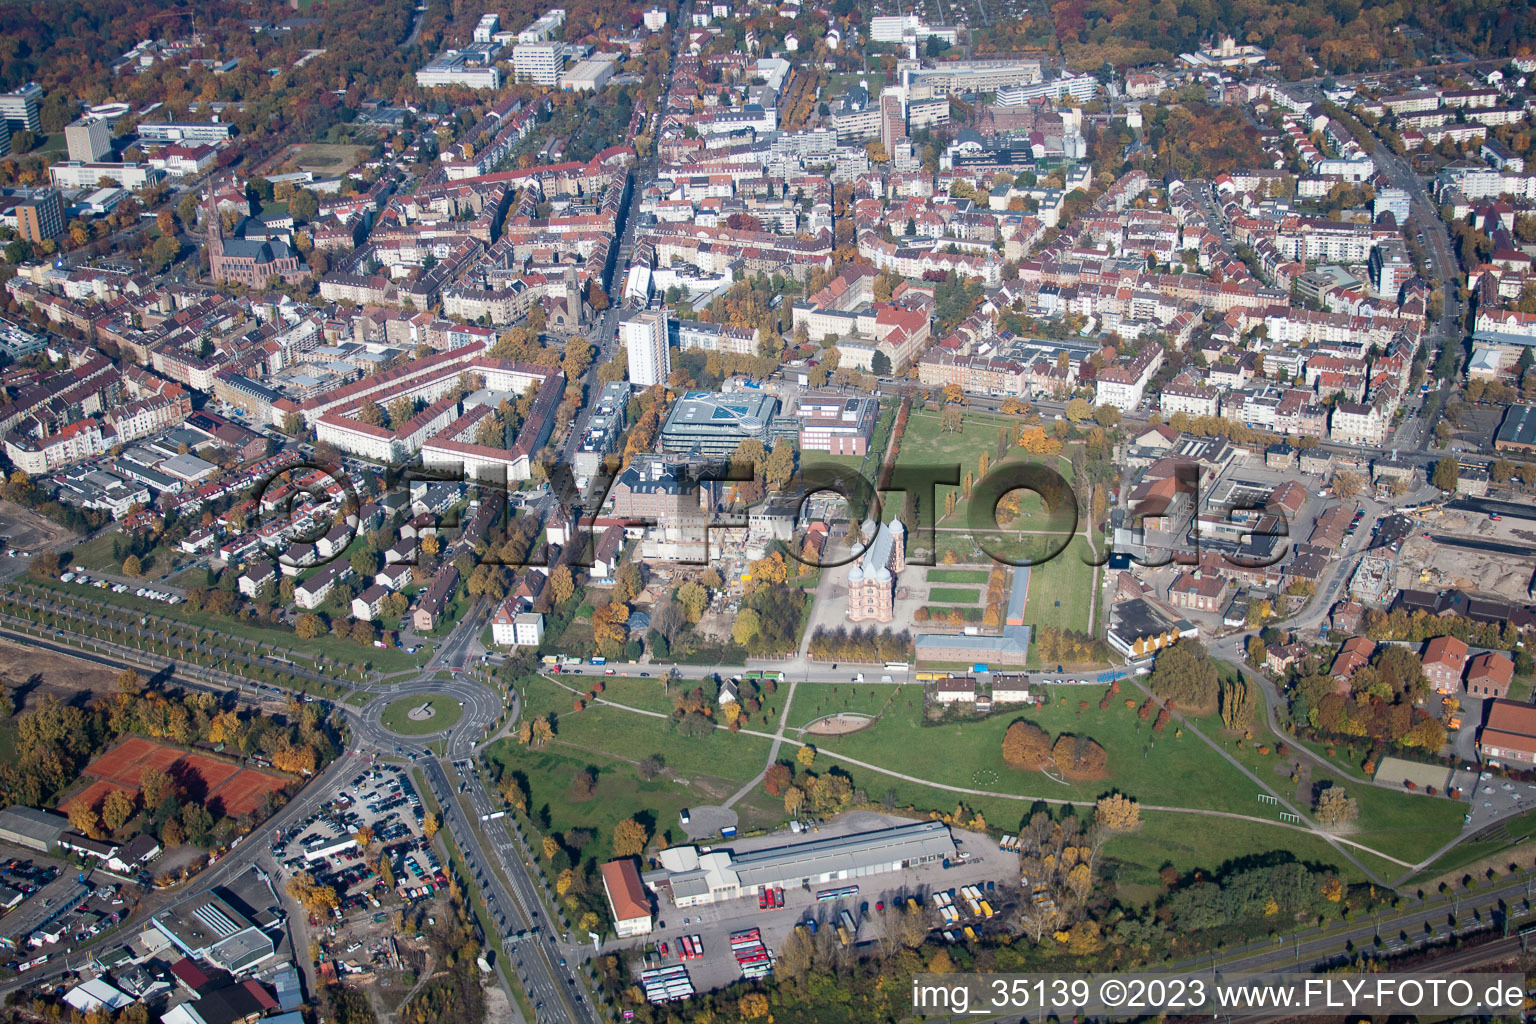 District Oststadt in Karlsruhe in the state Baden-Wuerttemberg, Germany viewn from the air